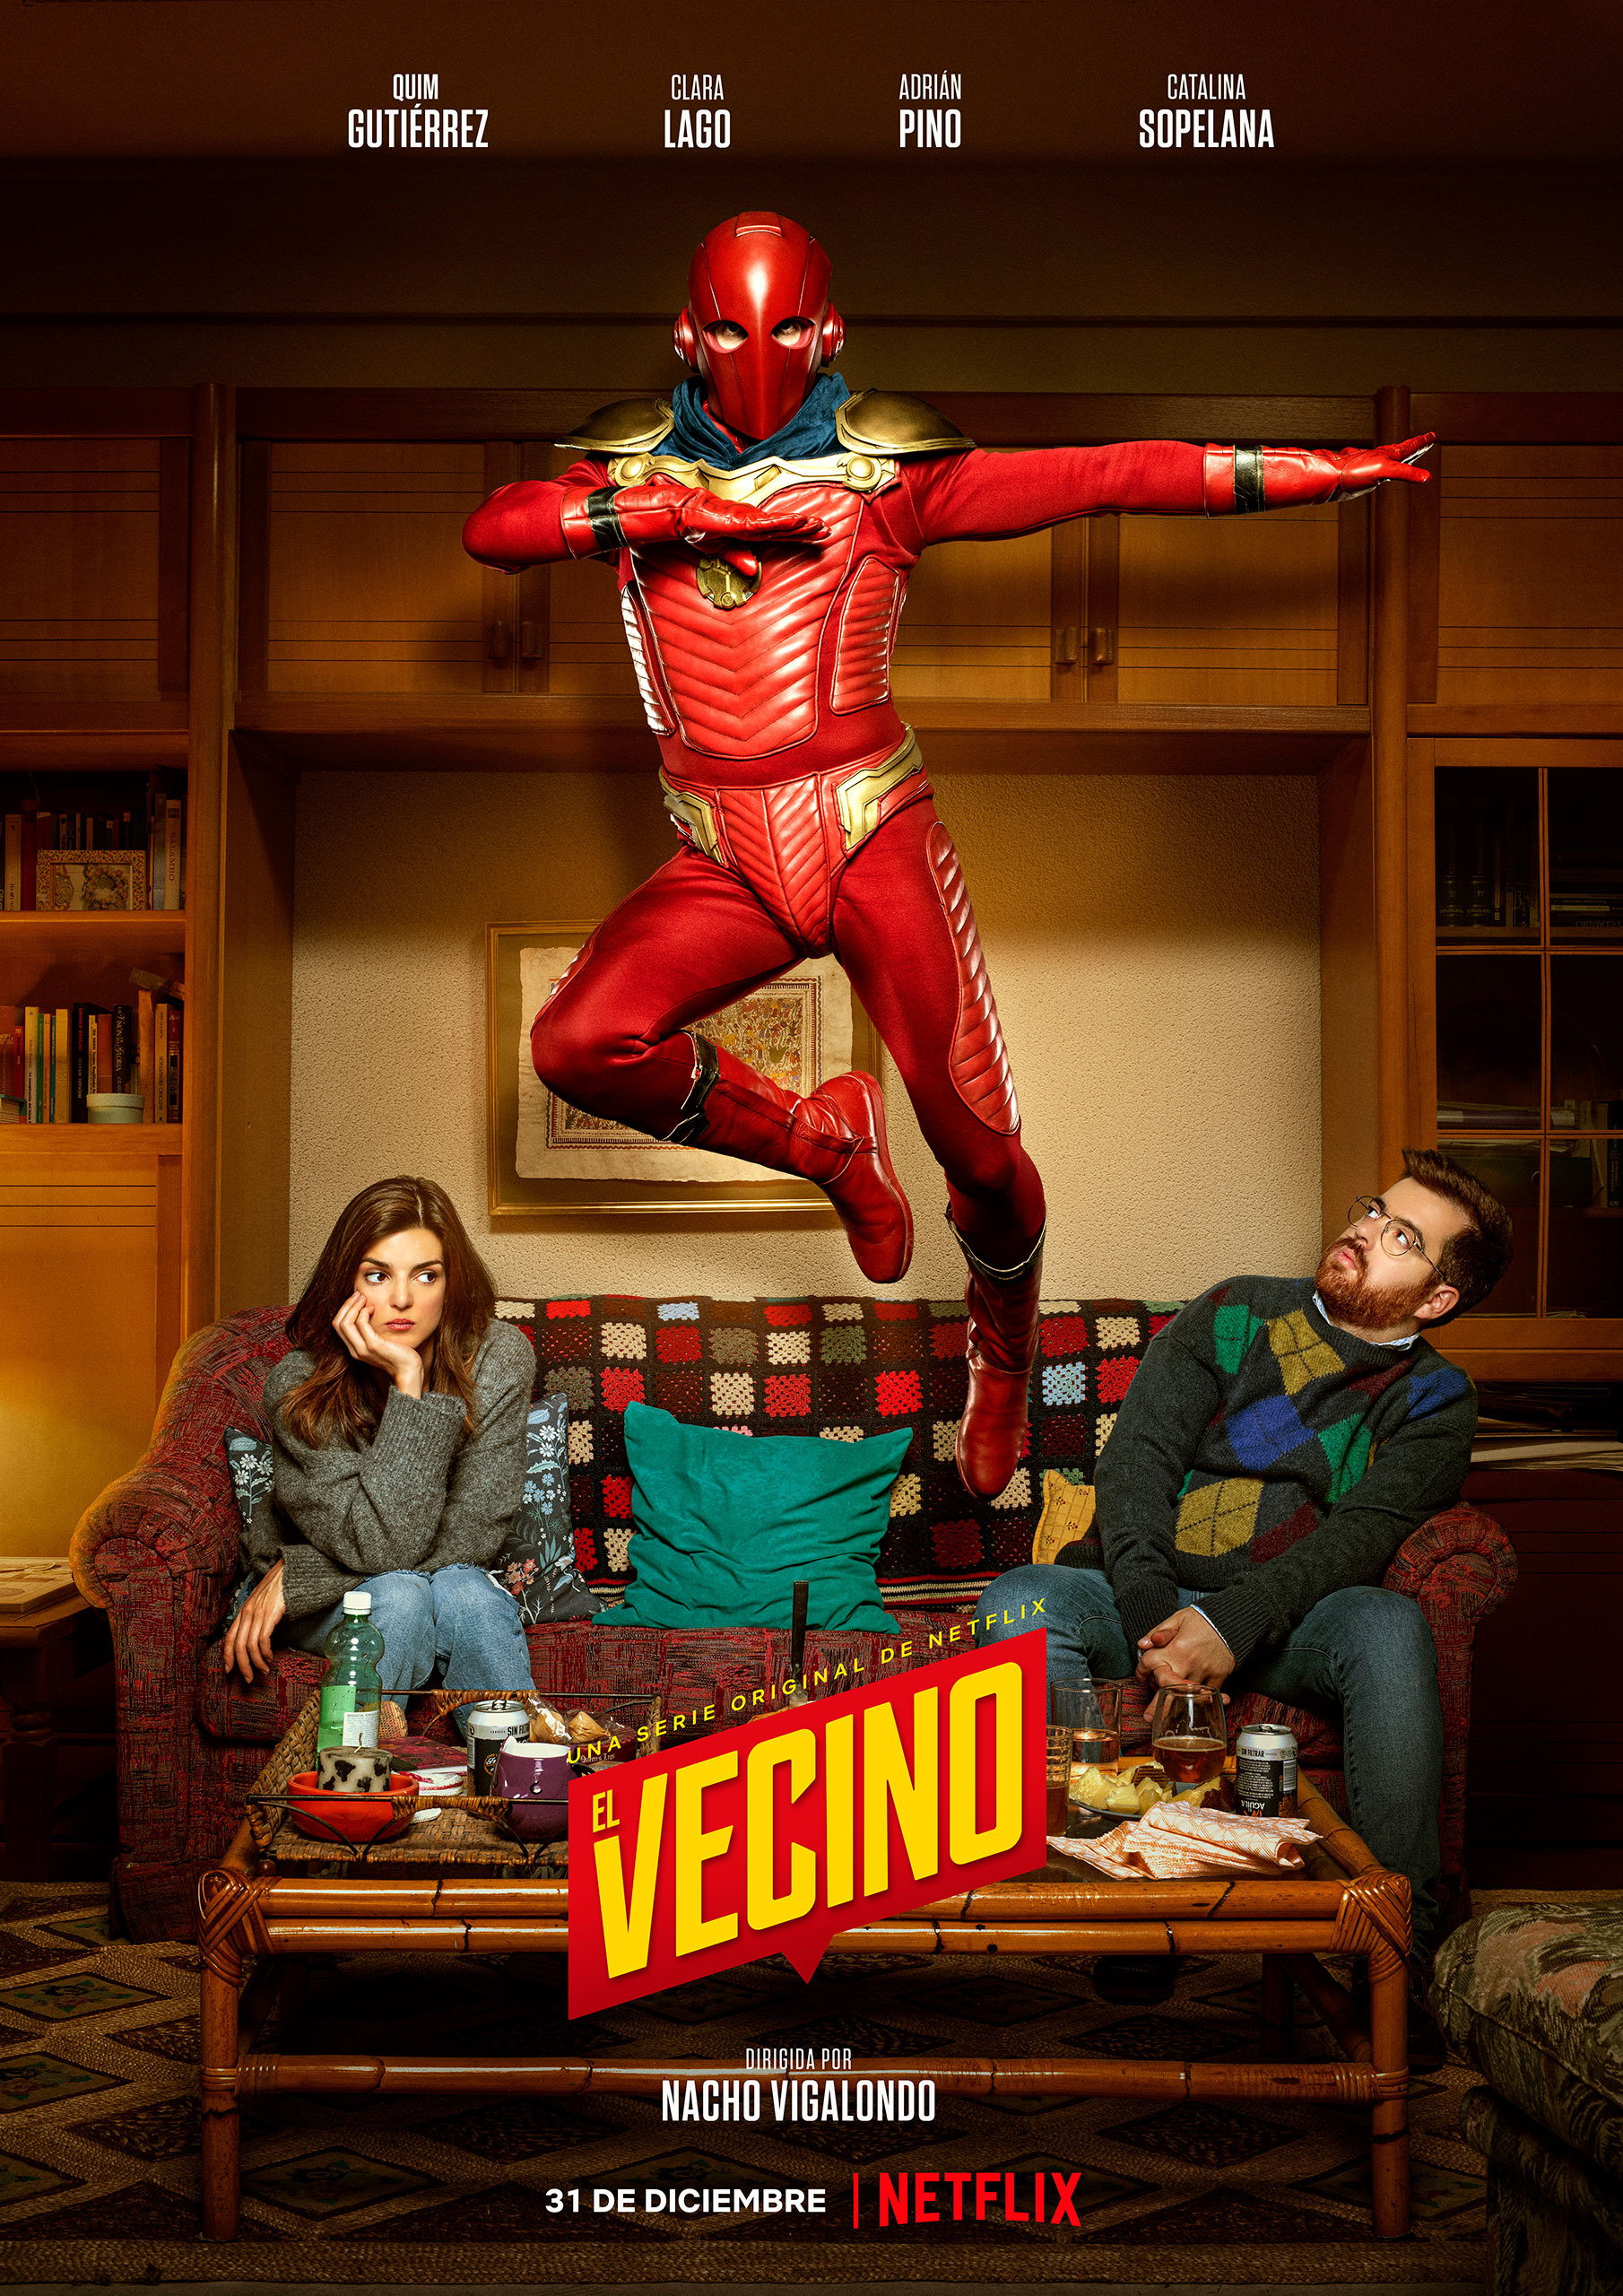 Mega Sized TV Poster Image for El vecino (#7 of 9)